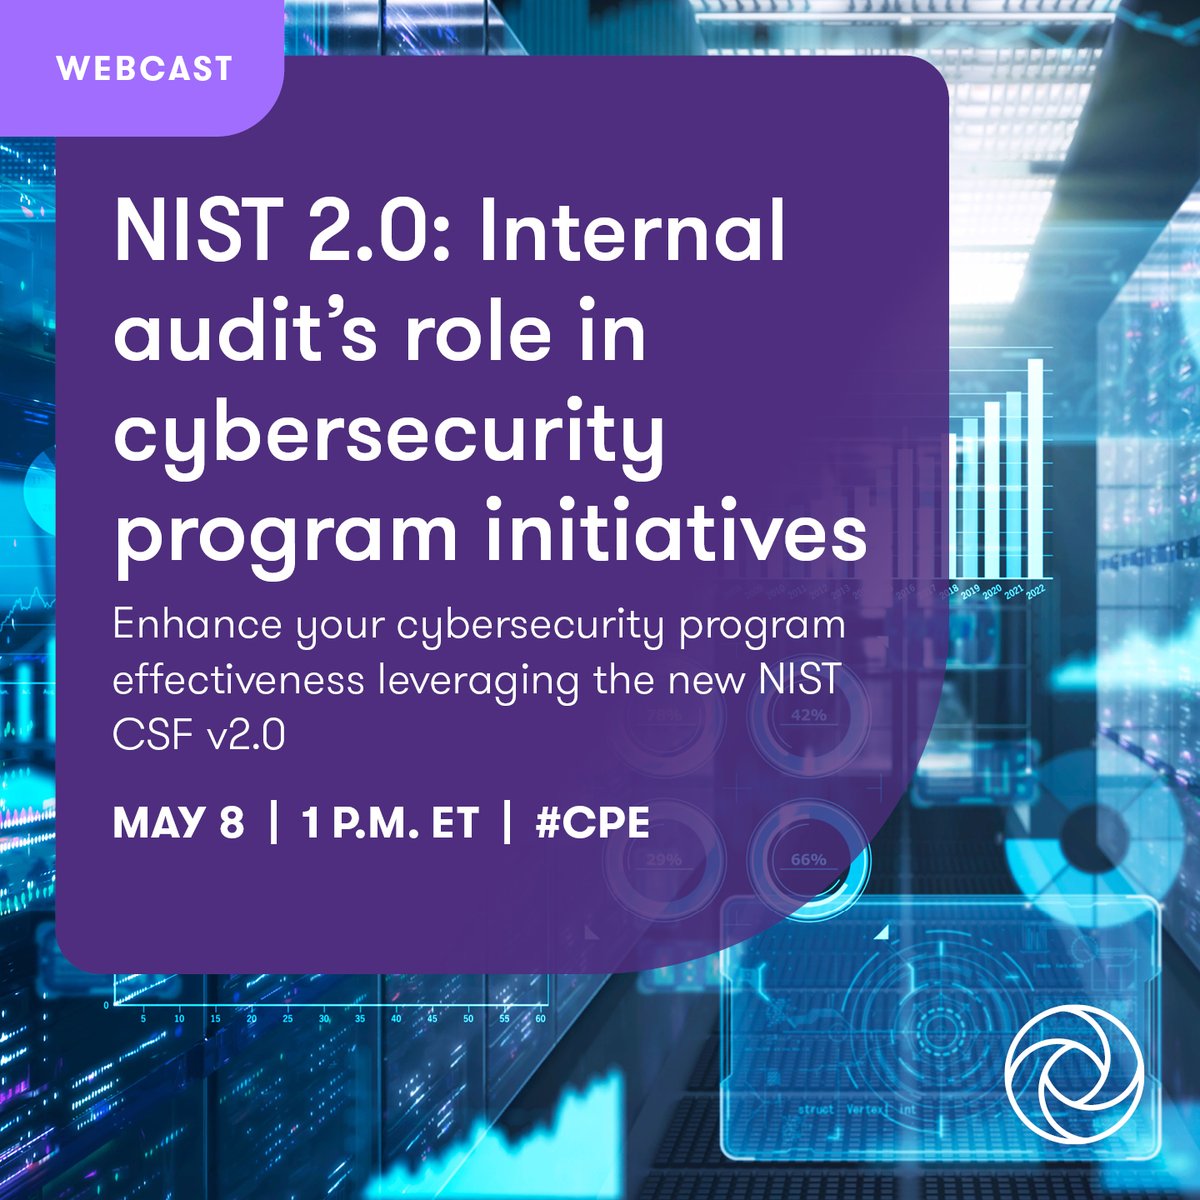 The NIST Cybersecurity Framework has evolved with a new function, govern. Sign up for our #webcast on May 8th to learn about framework updates and understand how #InternalAudit leaders can elevate their #cybersecurity program. gt-us.co/44jVQbS #CPE #webinar